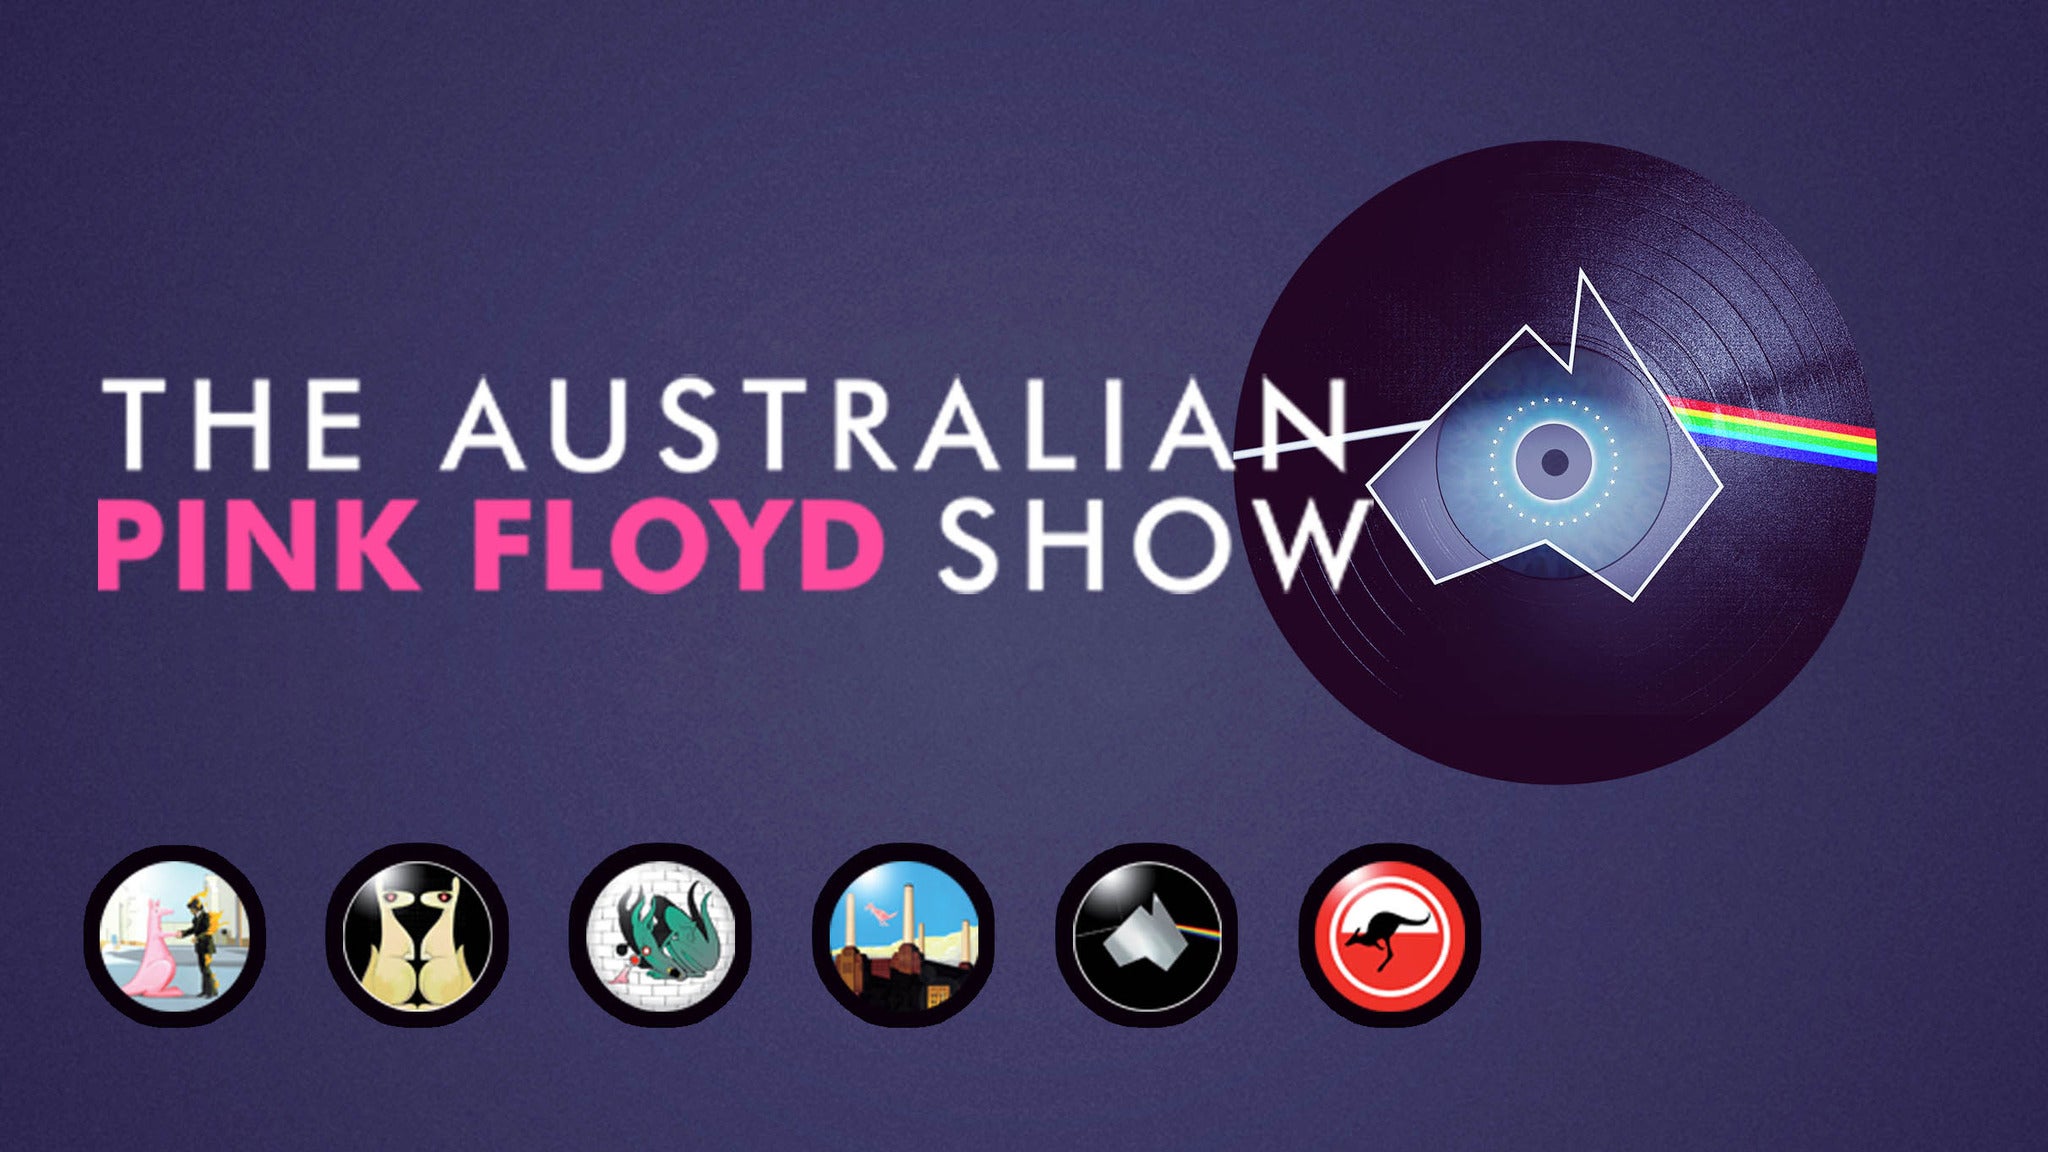 The Australian Pink Floyd: All That Is To Come Tour - Ft Lauderdale, FL 33312